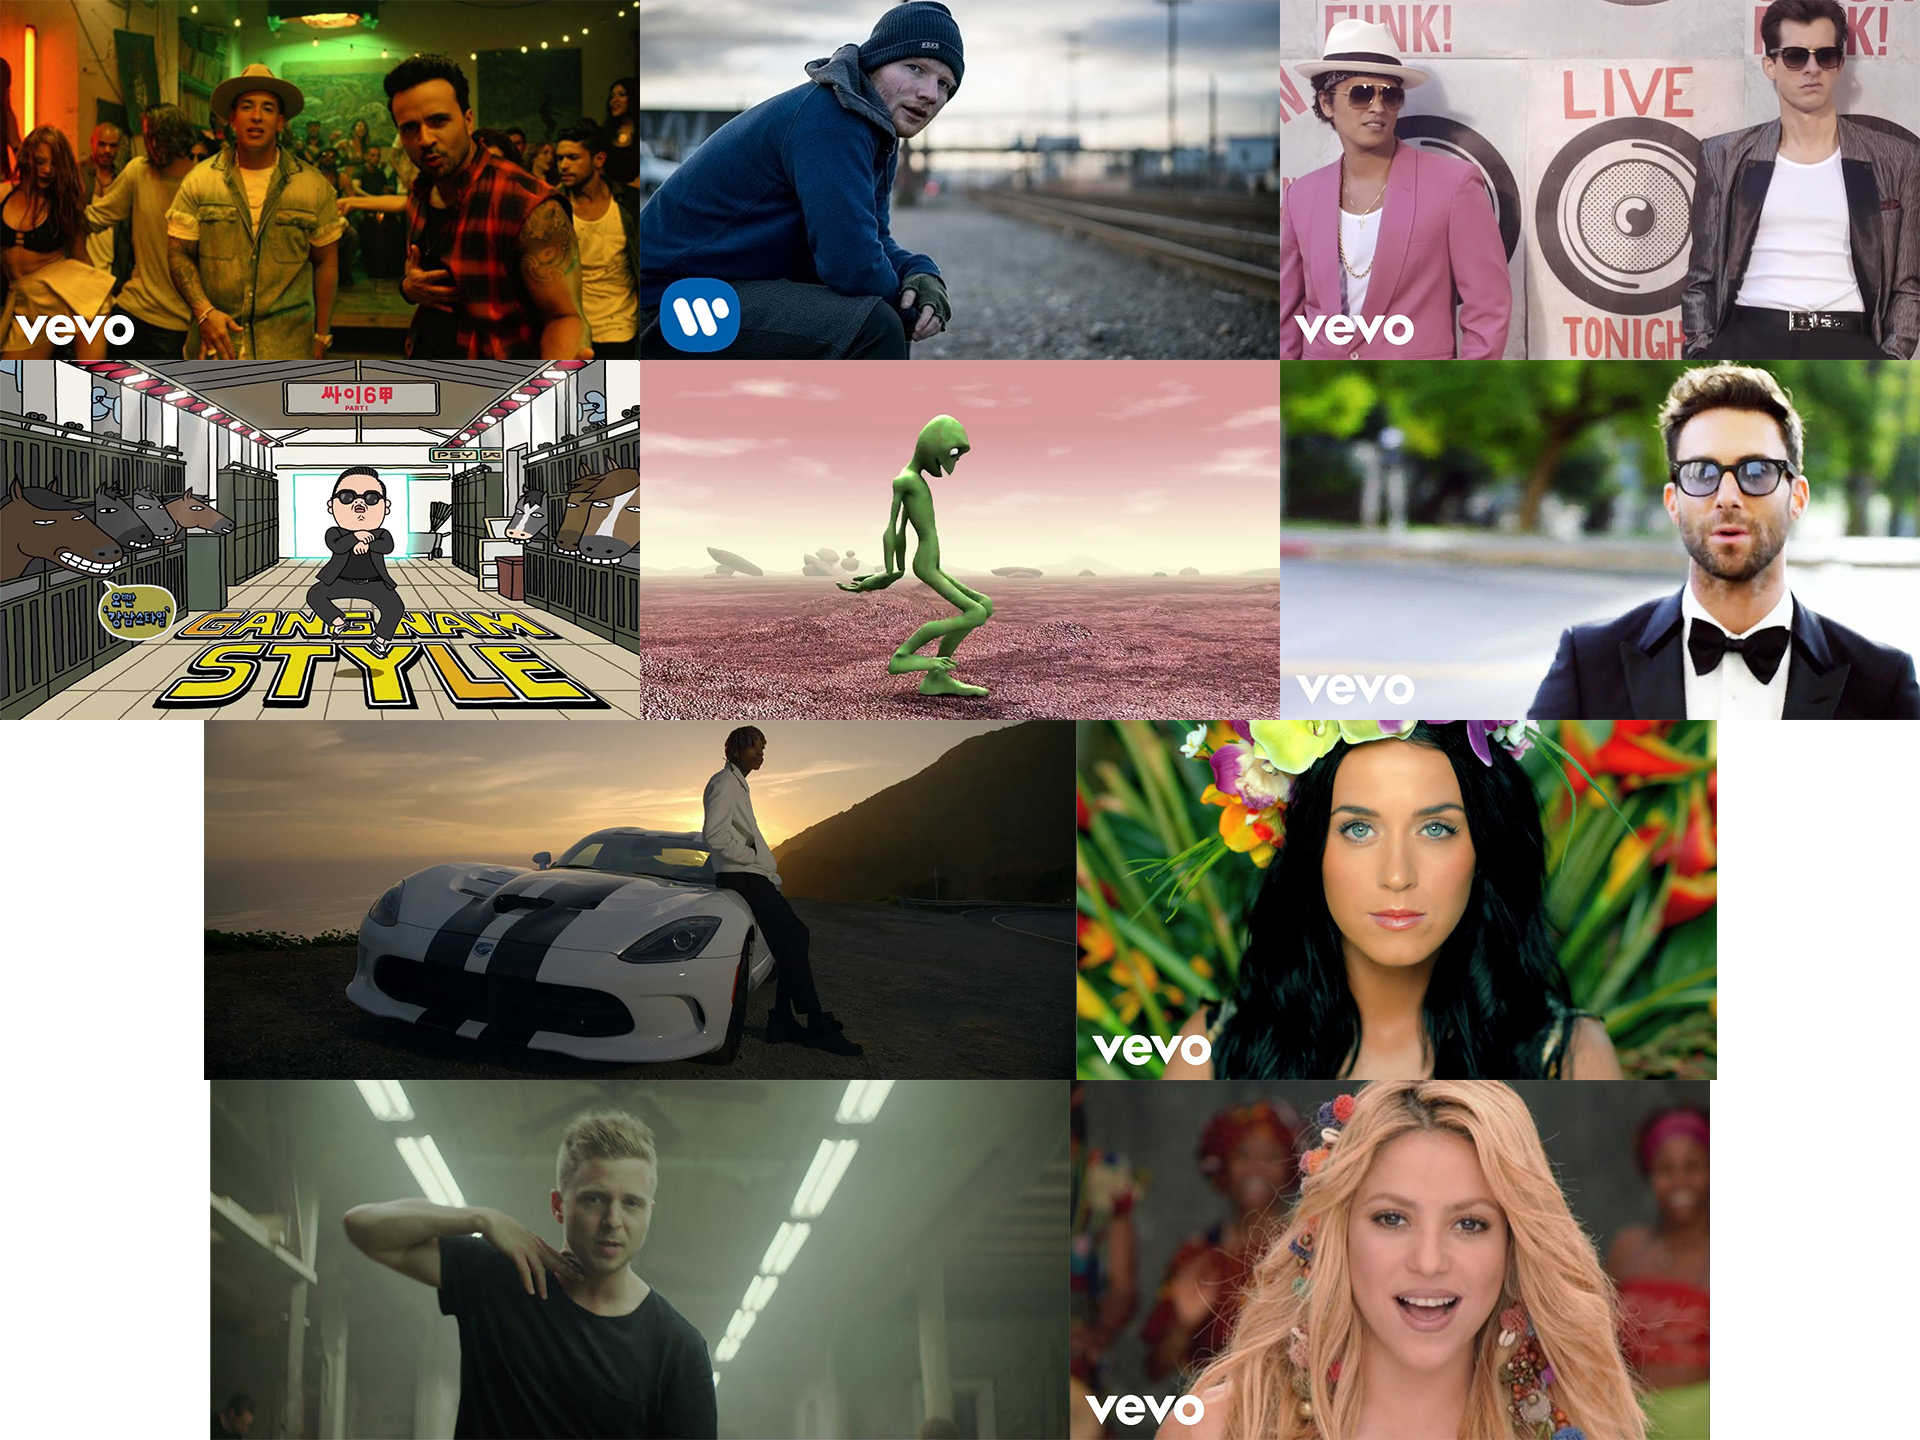 The thumbnails of all of the top 10 music videos on YouTube